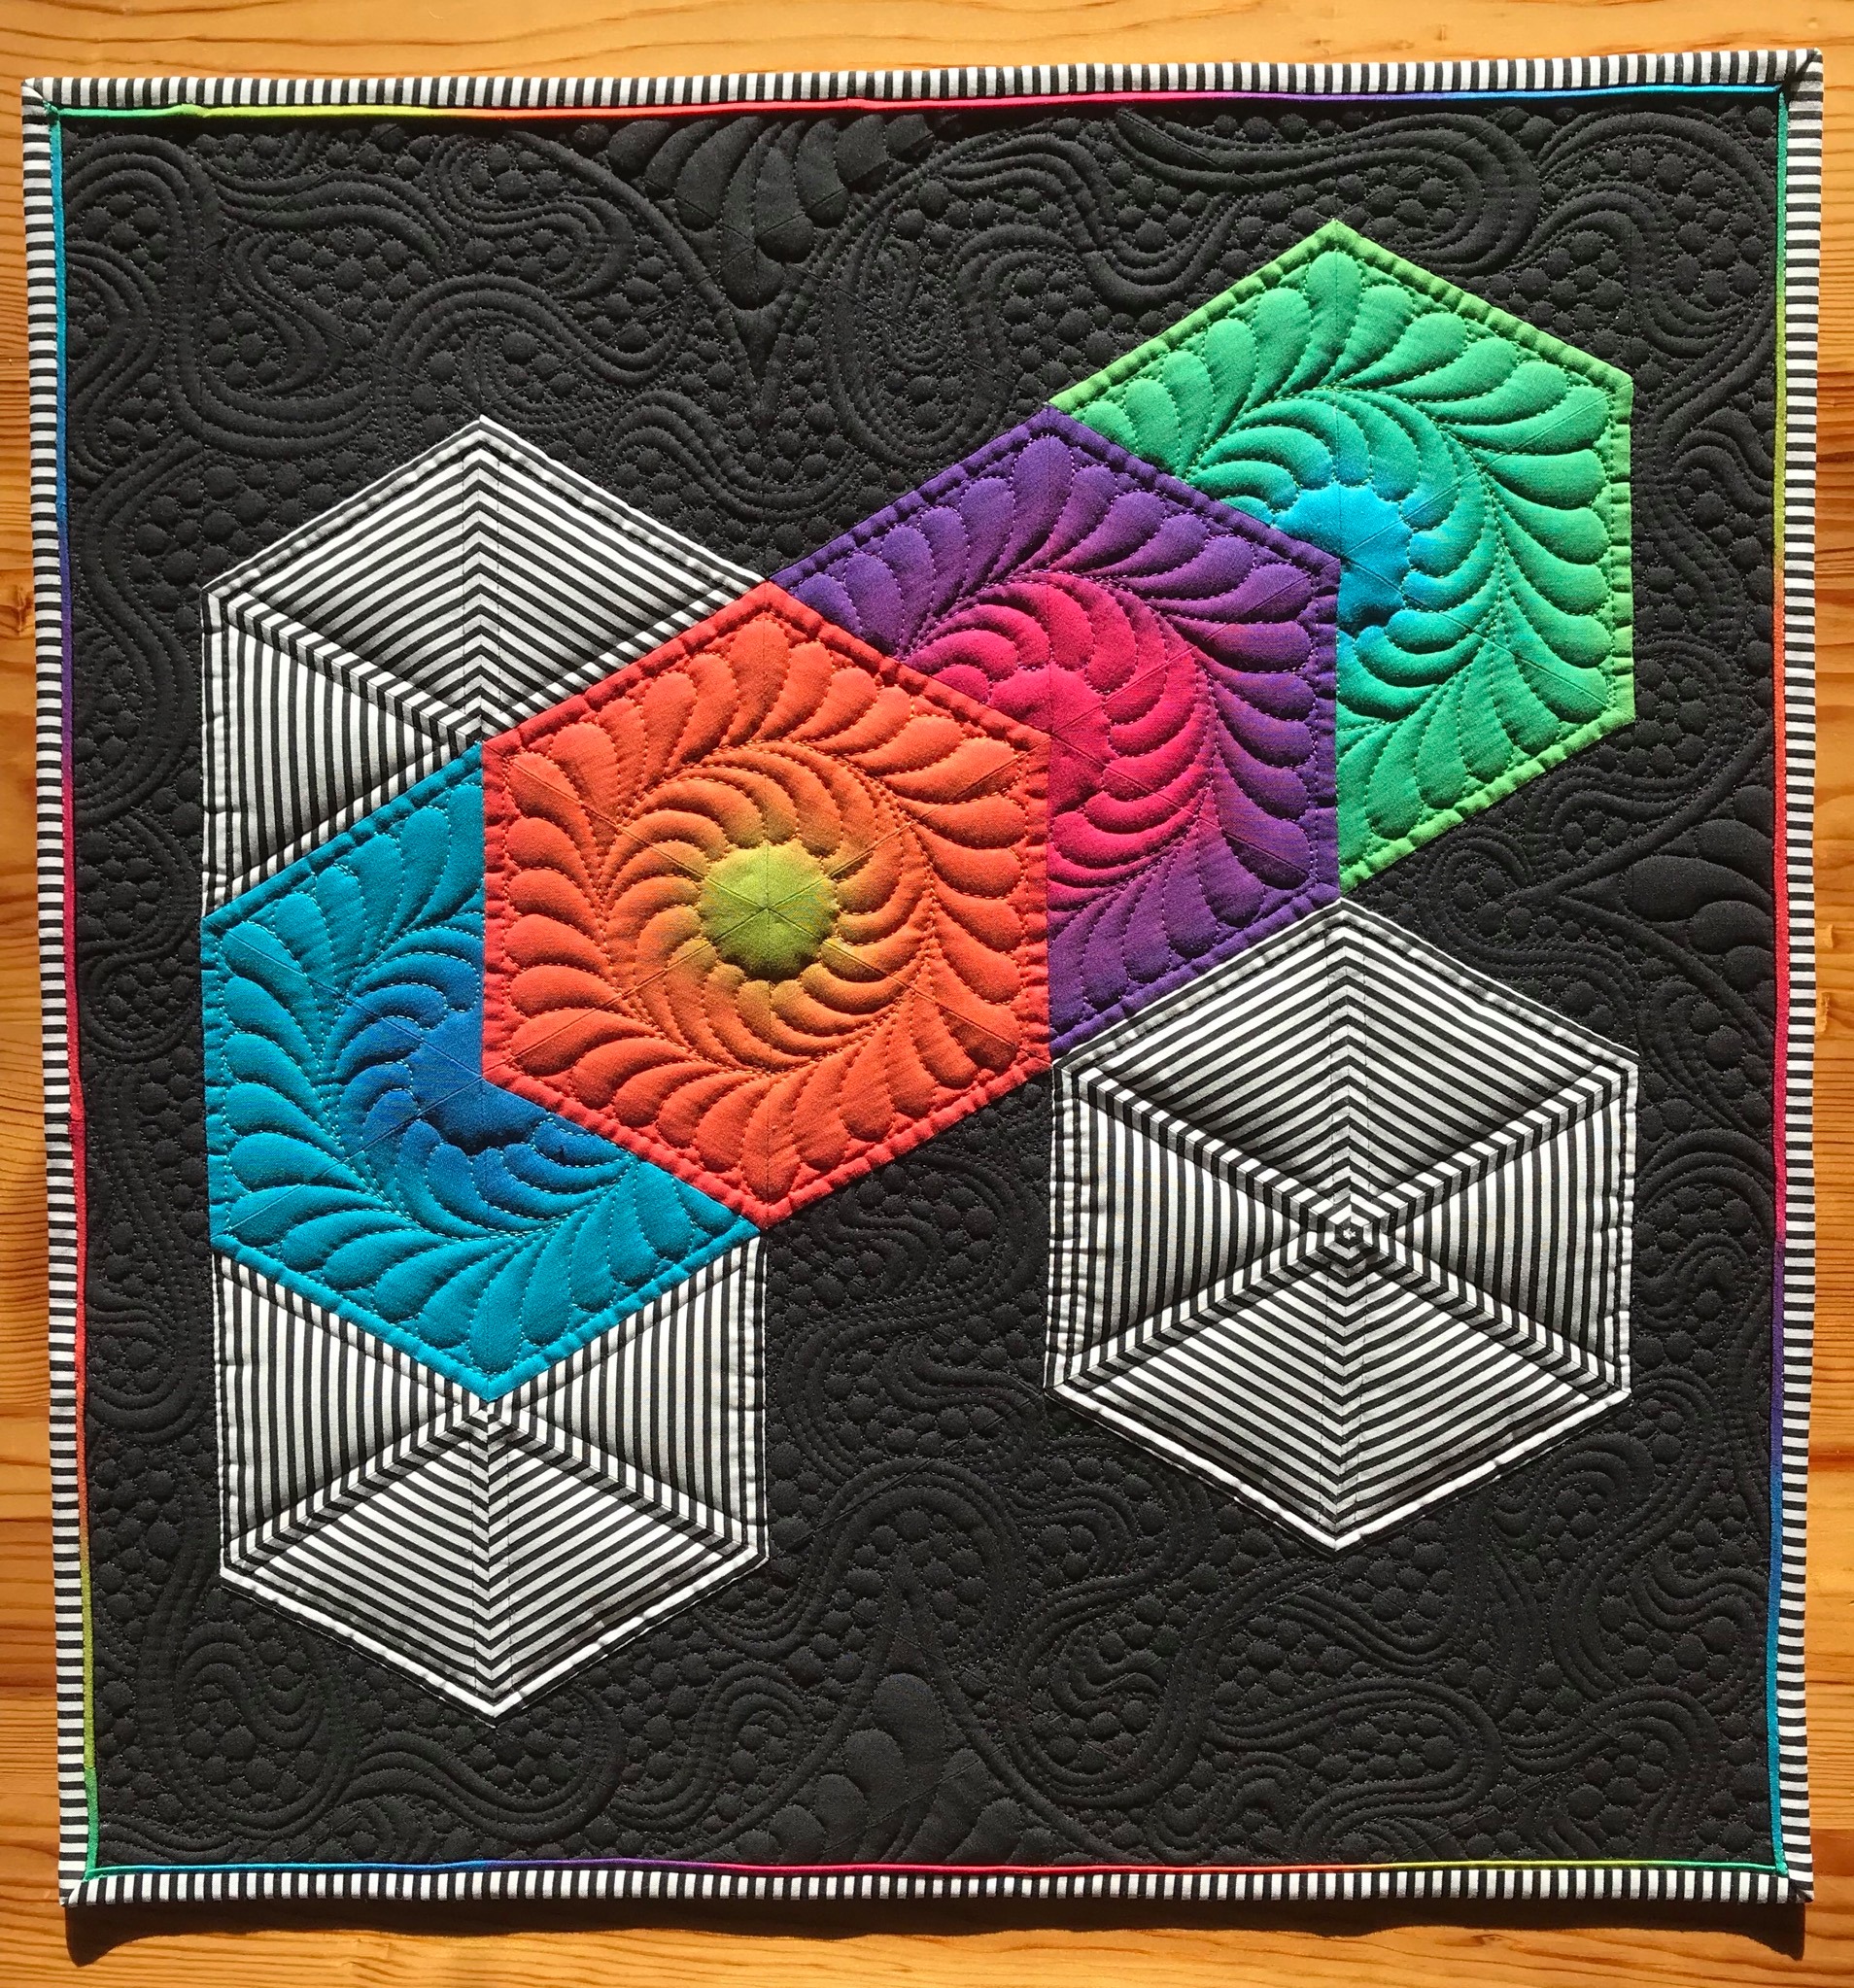 Prisms of colorful fabric with detailed stitching on a black background